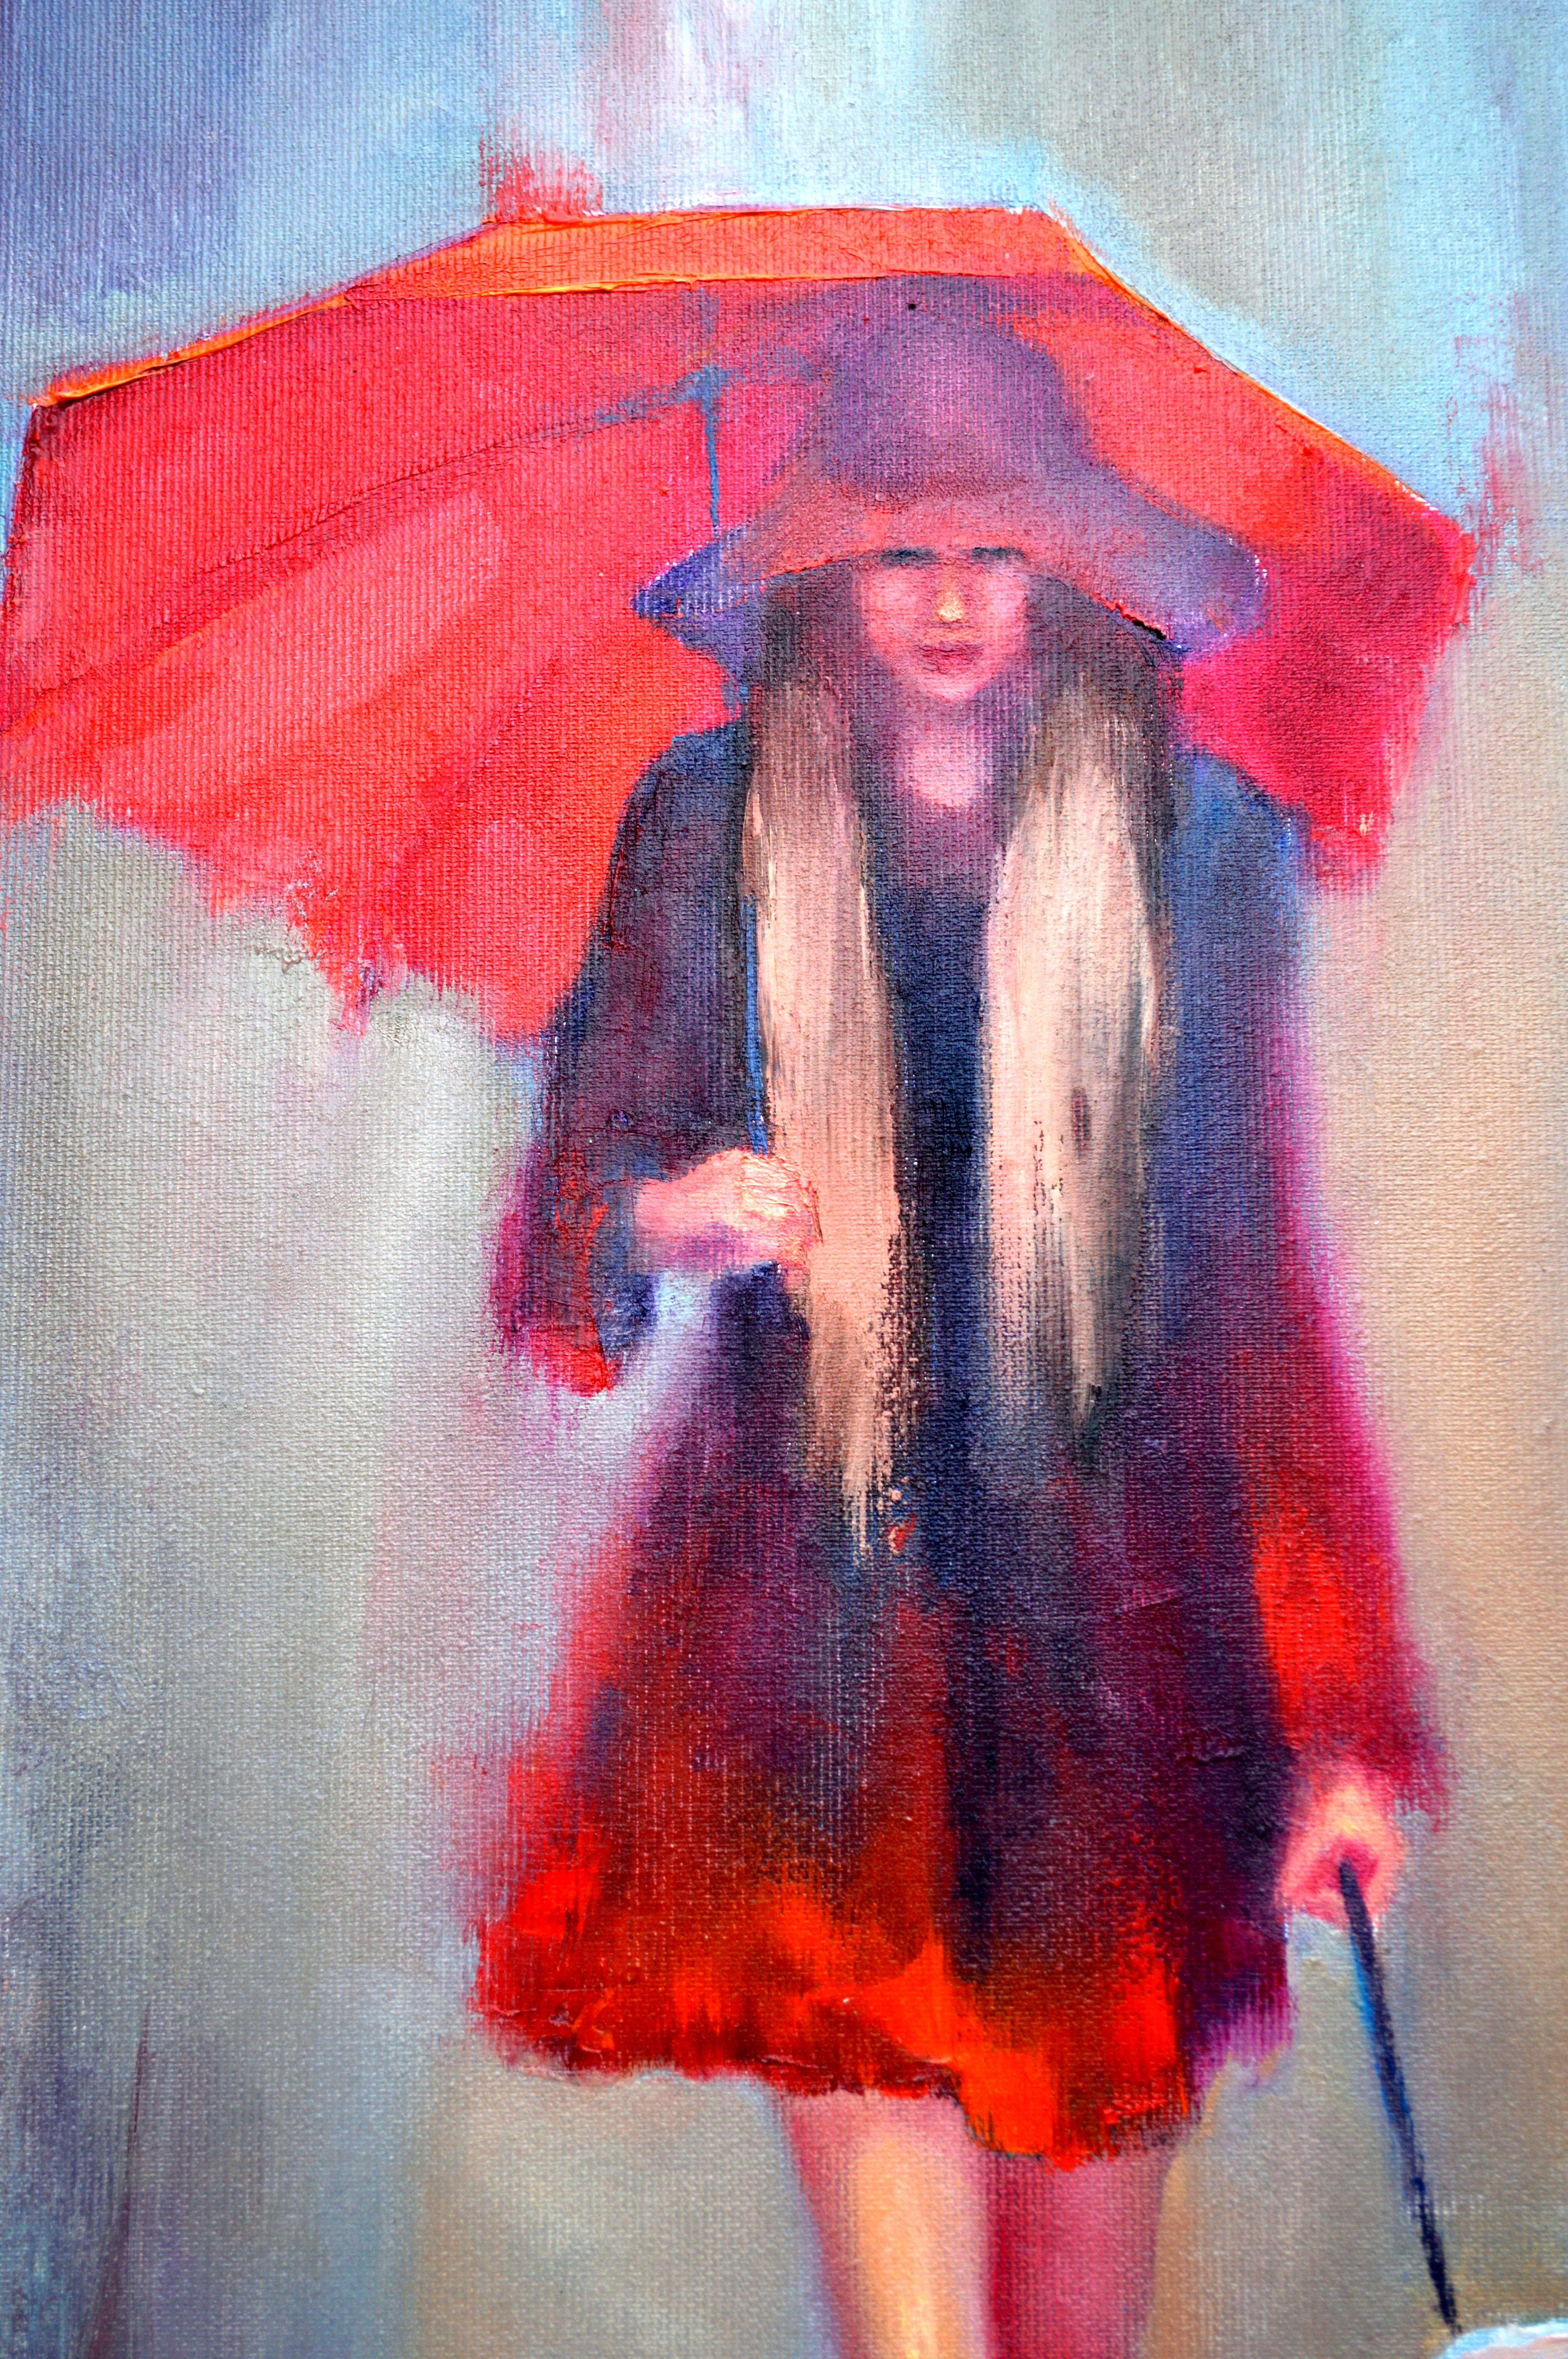 In this oil painting, I've melded expressionism with touches of impressionism and realism to capture a moment of serene companionship amidst nature's downpour. The vivid red umbrella symbolizes a beacon of warmth, while the gentle protective gesture